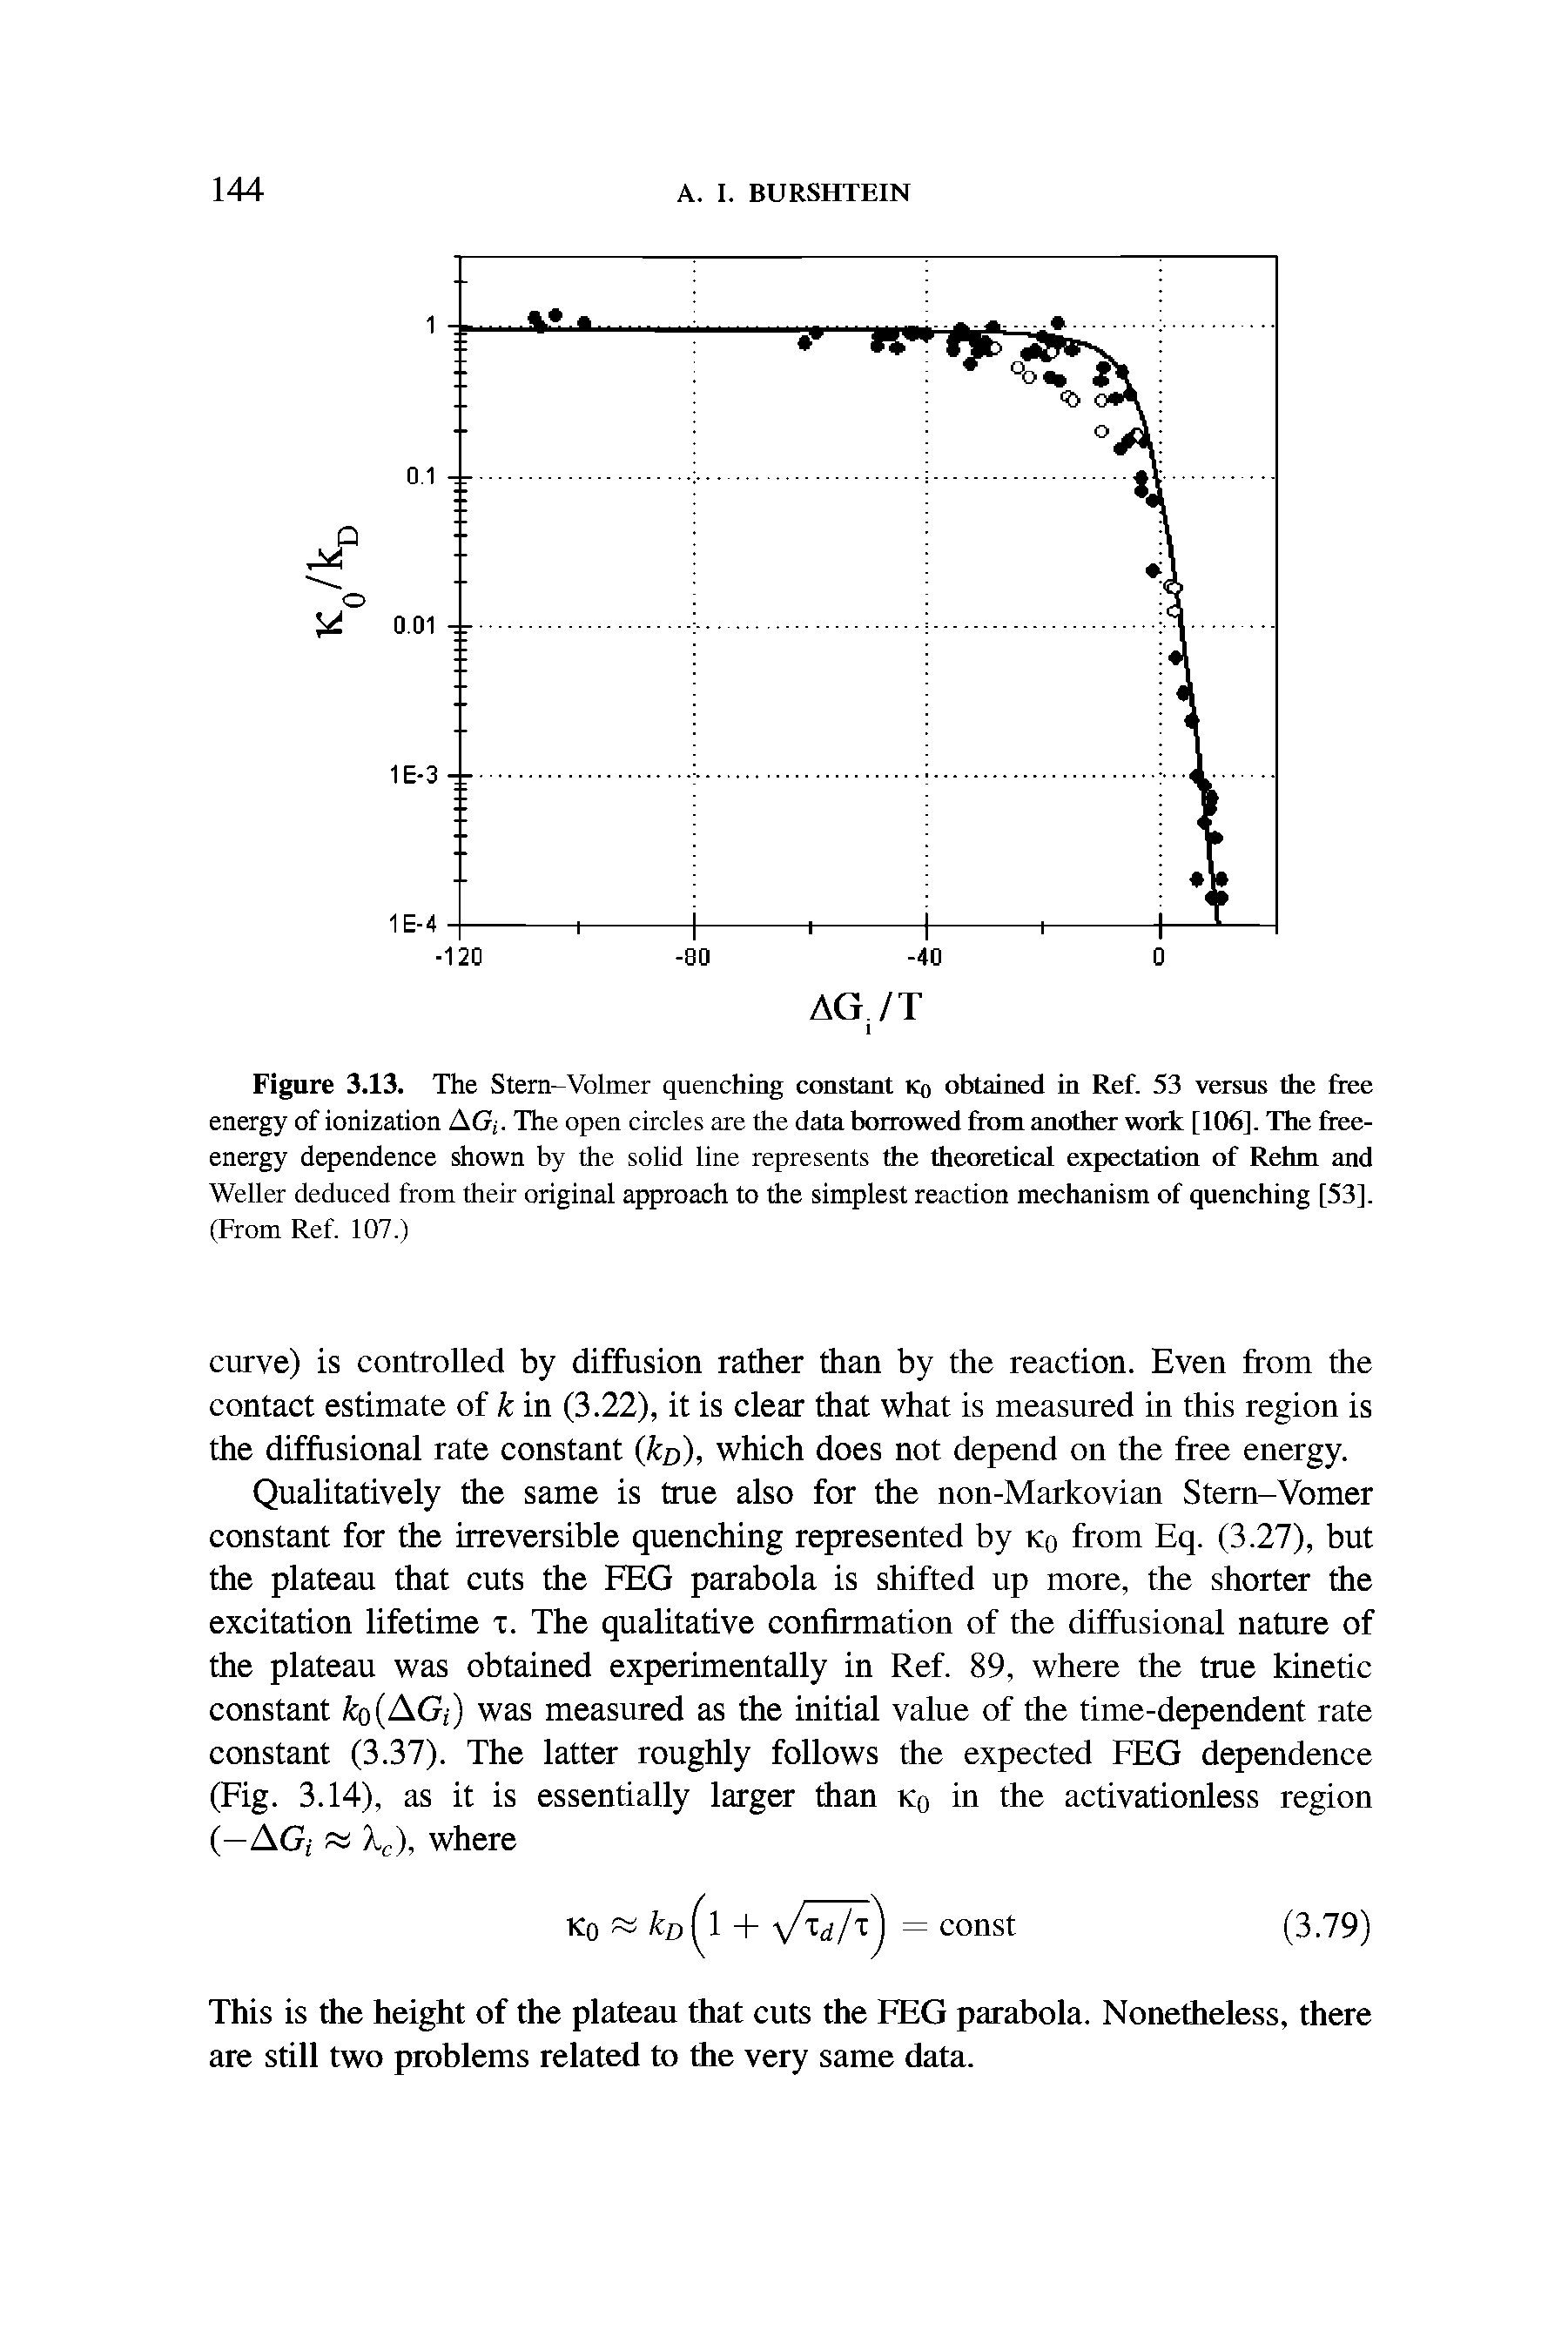 Figure 3.13. The Stern-Volmer quenching constant Ko obtained in Ref. 53 versus the free energy of ionization AG . The open circles are the data borrowed from another work [106], The free-energy dependence shown by the solid line represents the theoretical expectation of Rehm and Weller deduced from their original approach to the simplest reaction mechanism of quenching [53], (From Ref. 107.)...